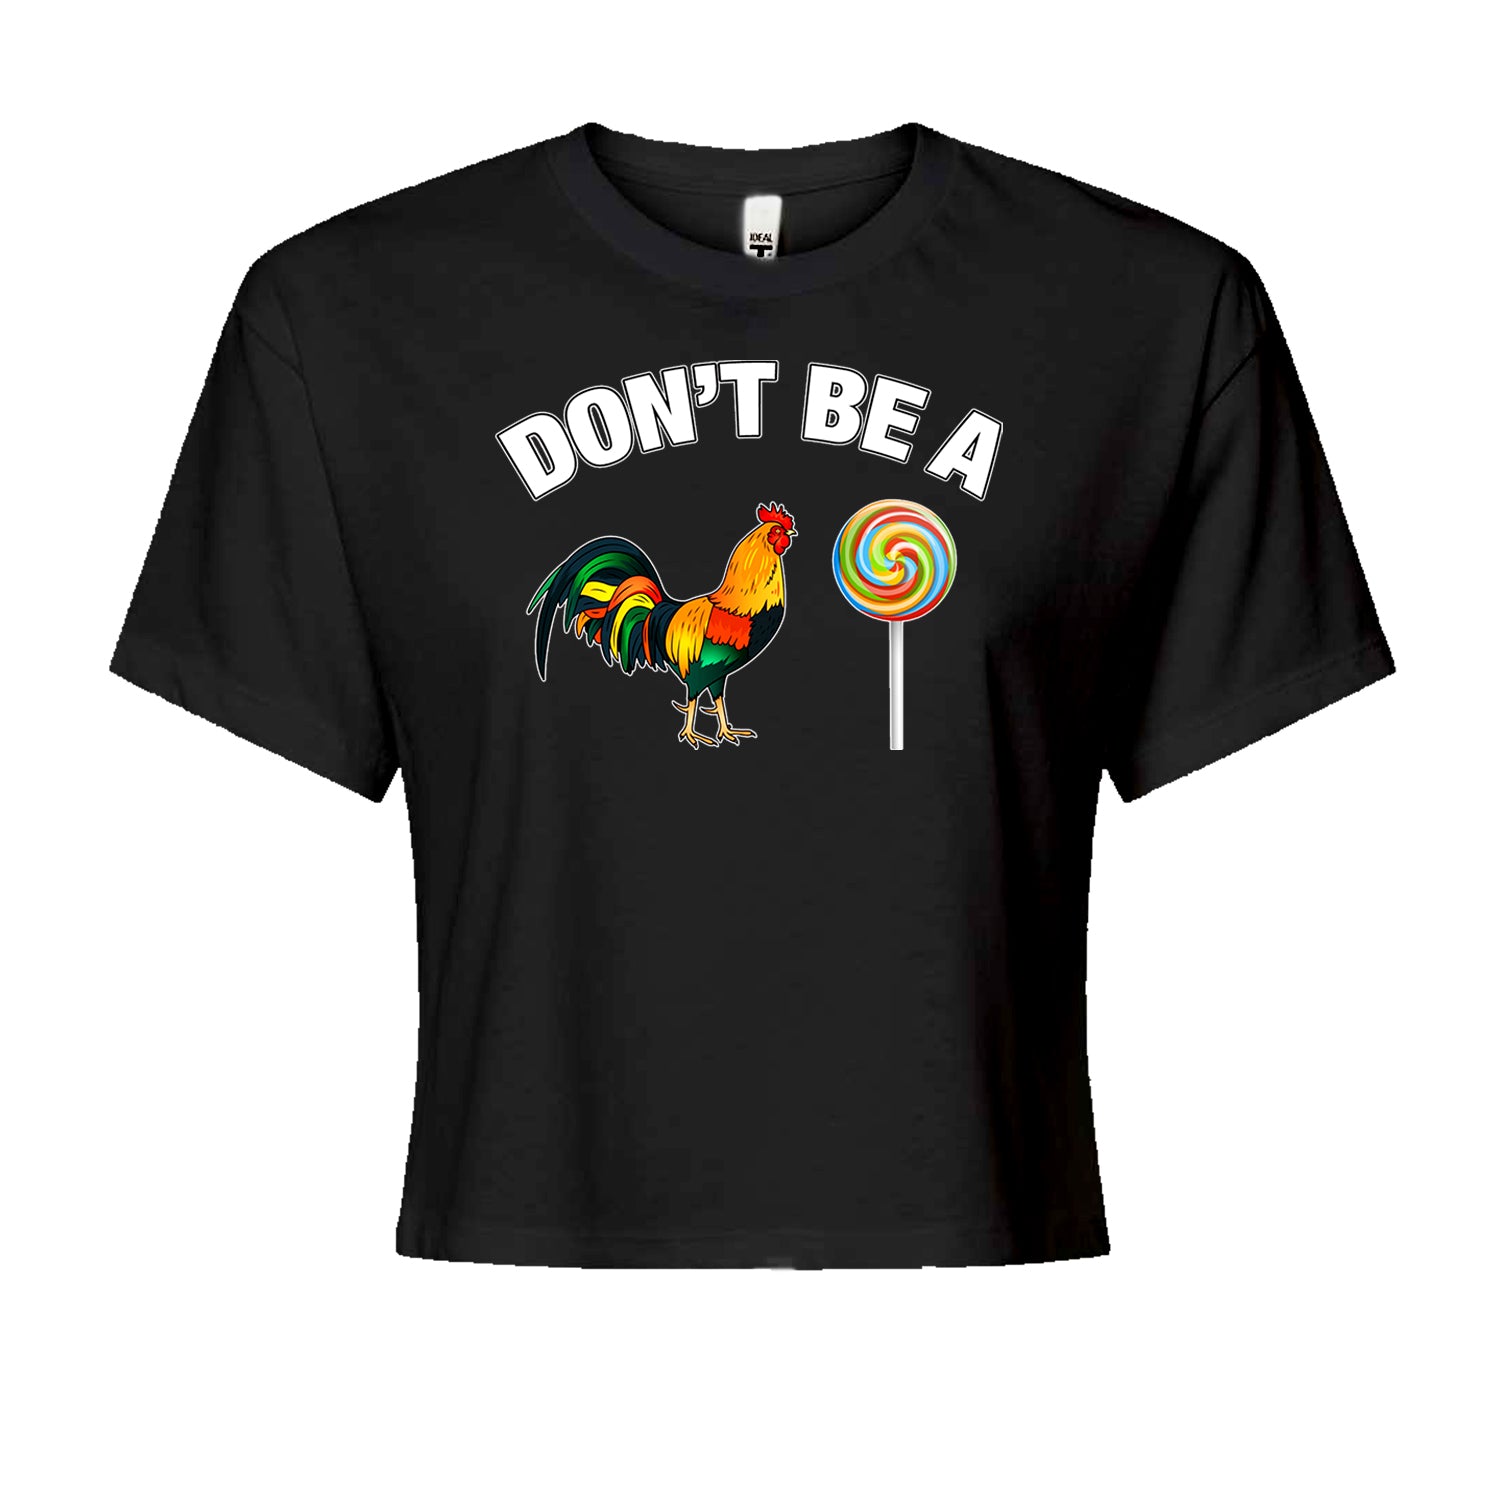 Don't Be A C-ck Sucker Funny Sarcastic Cropped T-Shirt